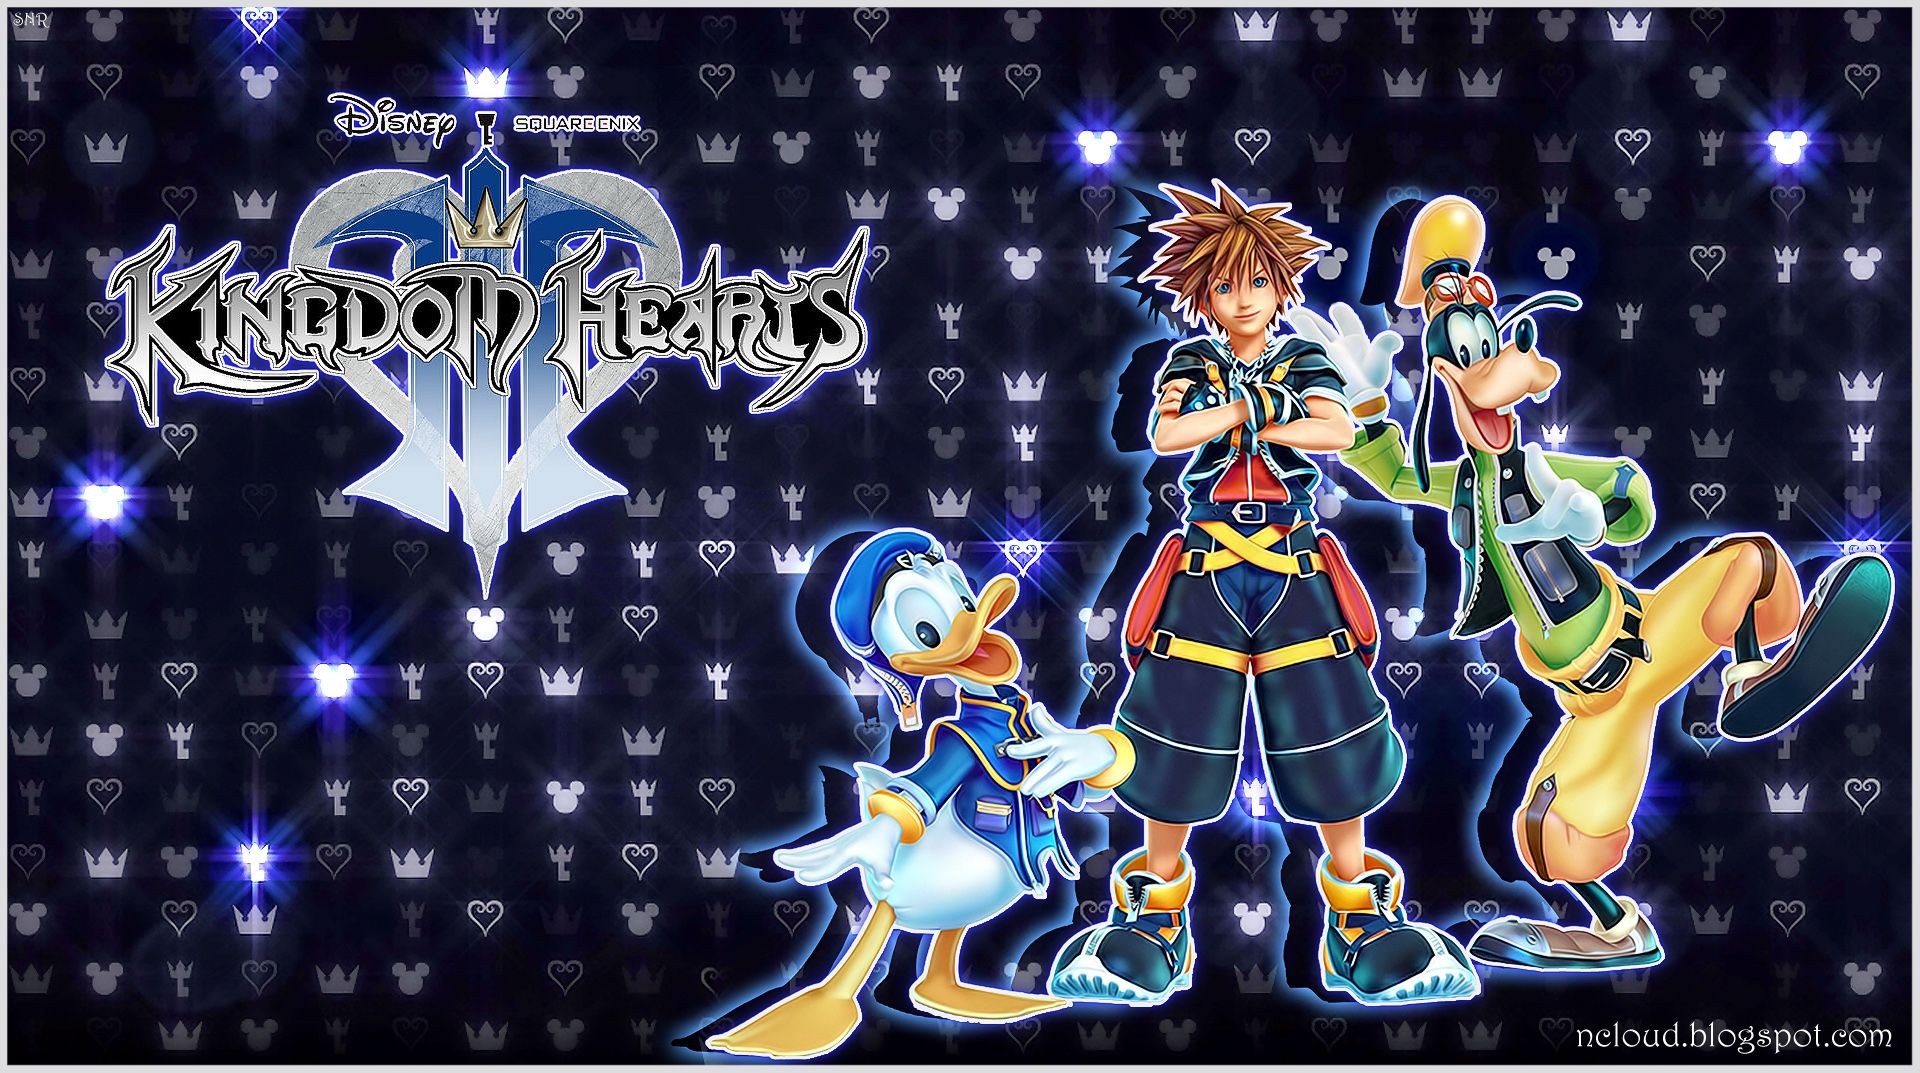 Free download Games Movies Music Anime My Kingdom Hearts 3 Wallpaper 2 [1920x1073] for your Desktop, Mobile & Tablet. Explore KH3 Wallpaper. Kingdom Hearts iPhone Wallpaper, HD Hearts Wallpaper, Kingdom Hearts HD Wallpaper